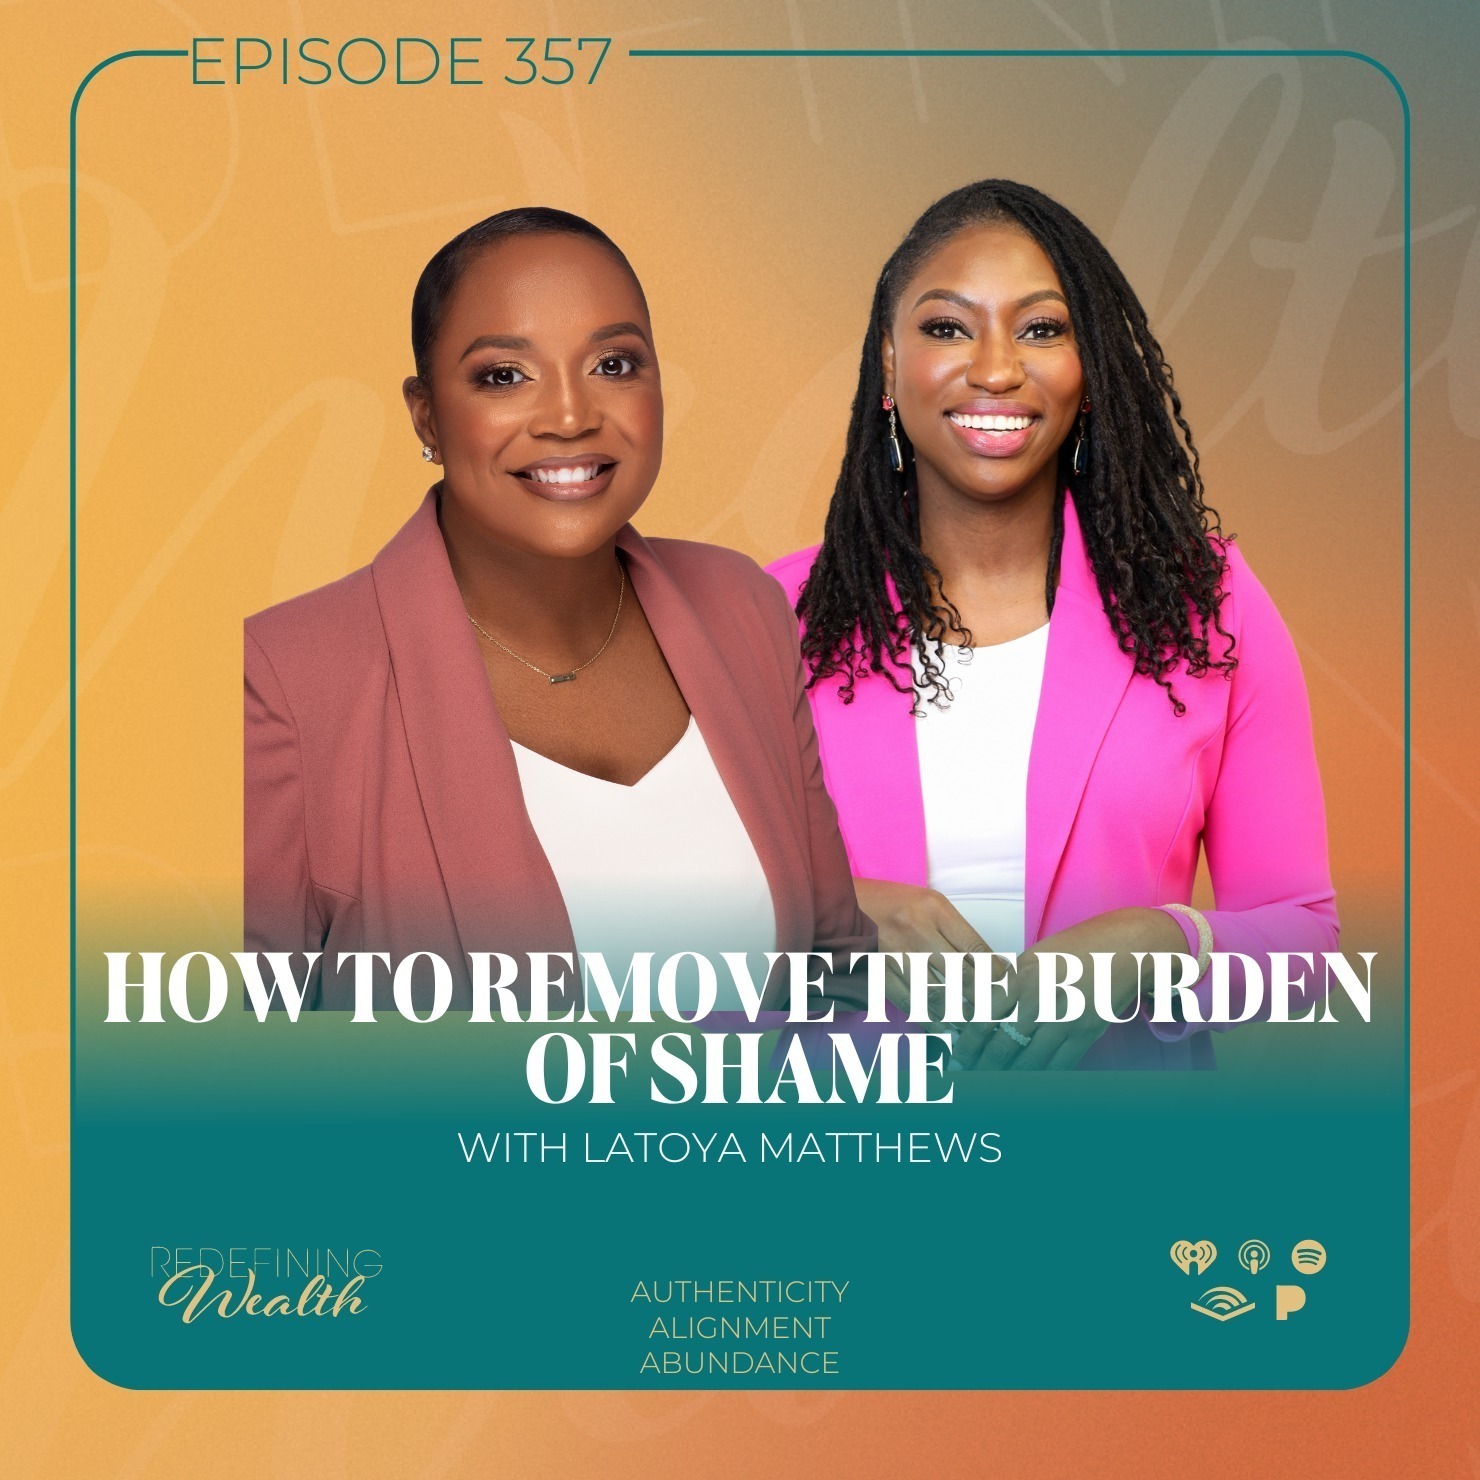 How to Remove the Burden of Shame with Latoya Mathews